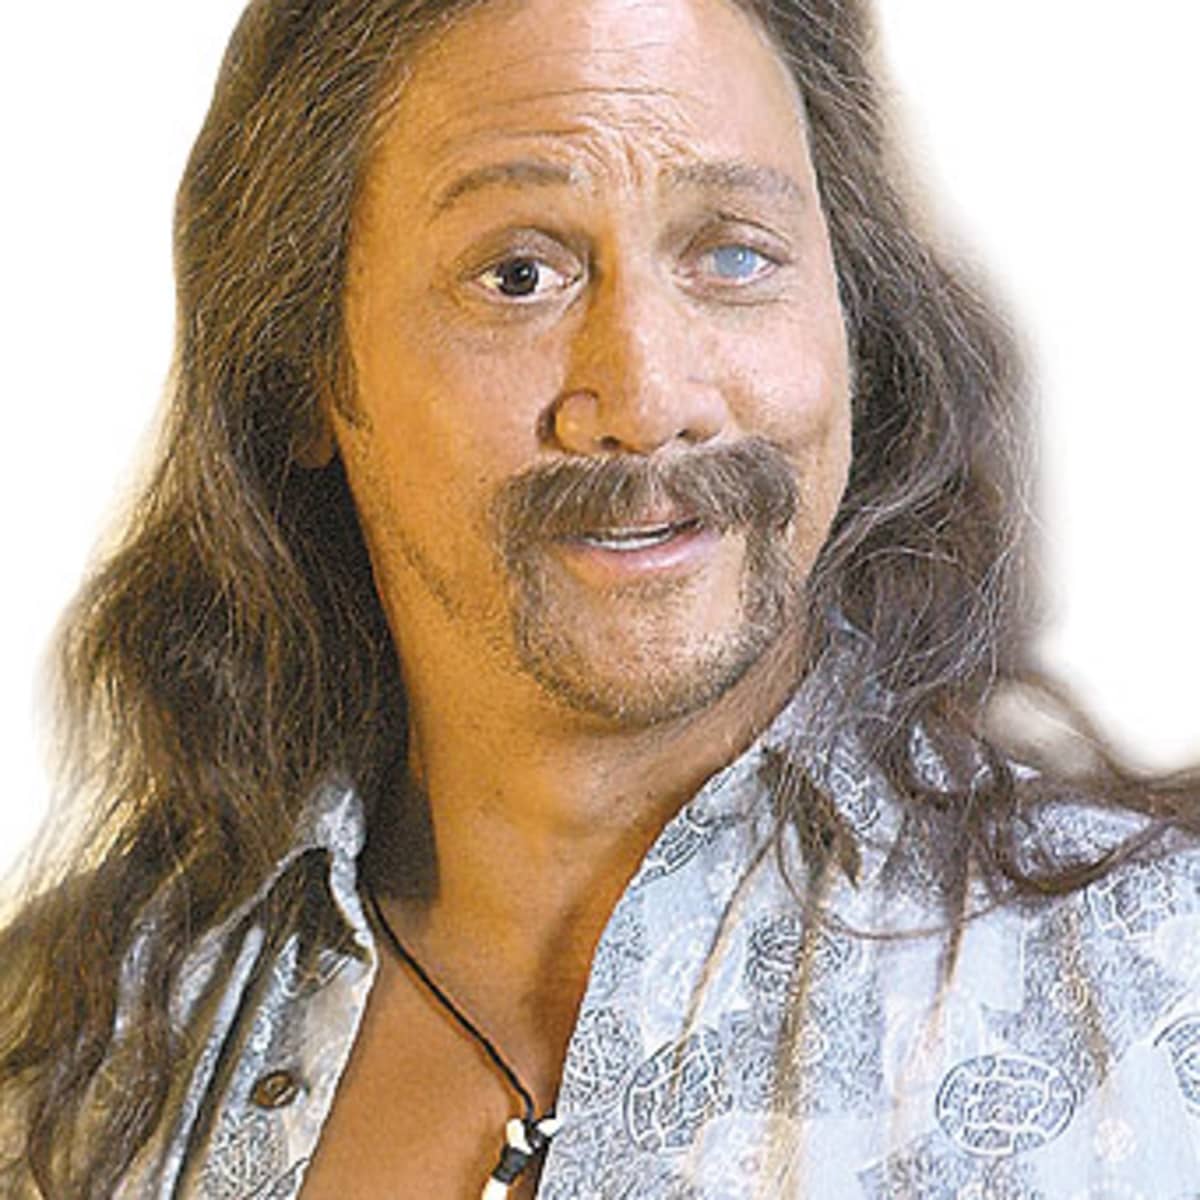 rob schneider you can do it